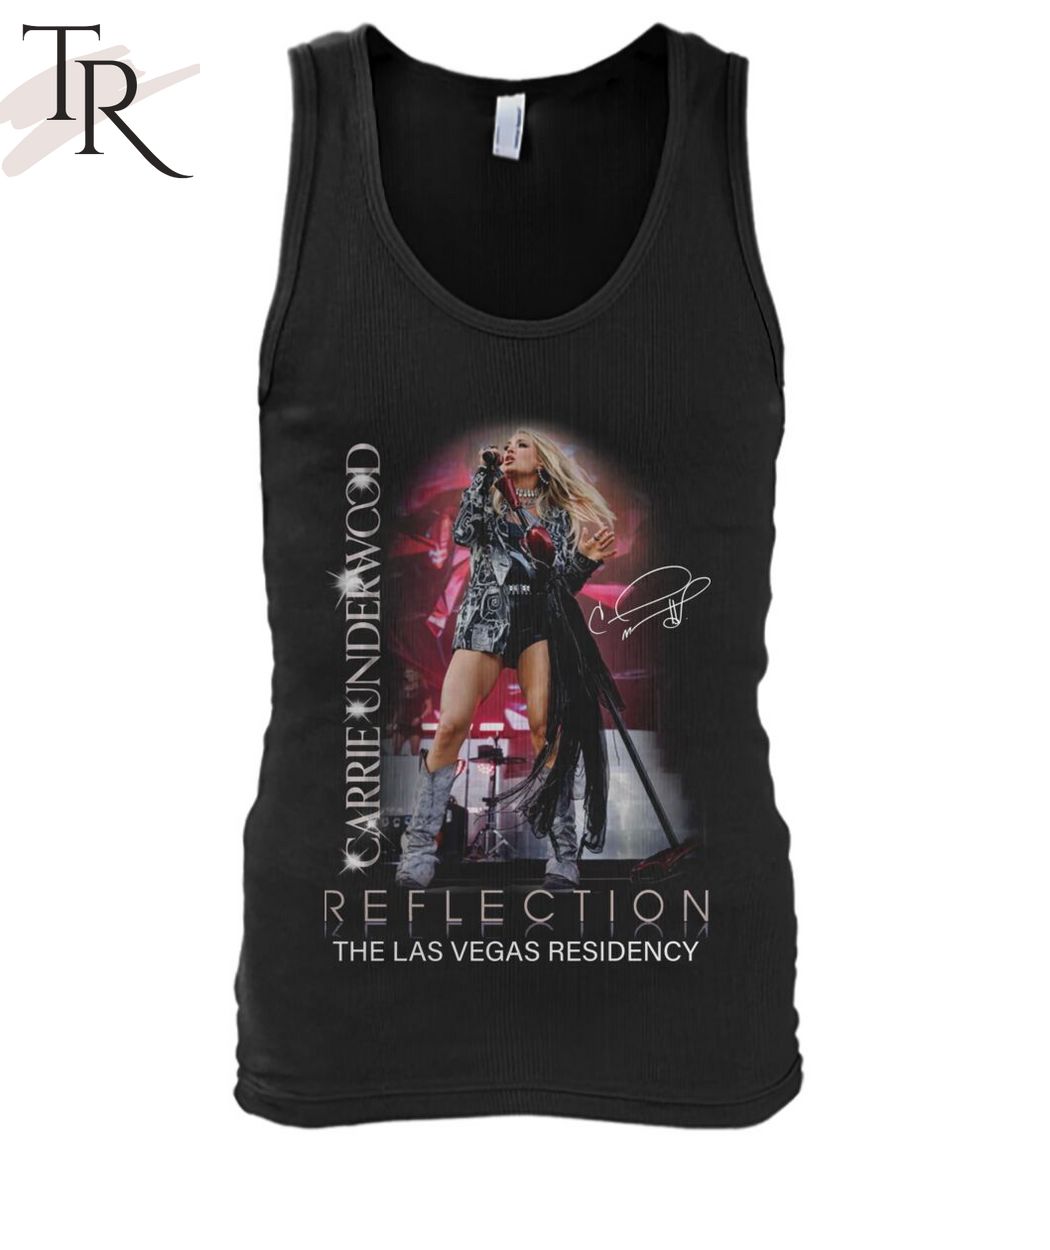 Carrie Underwood Reflection The Las Vegas Residency T-Shirt